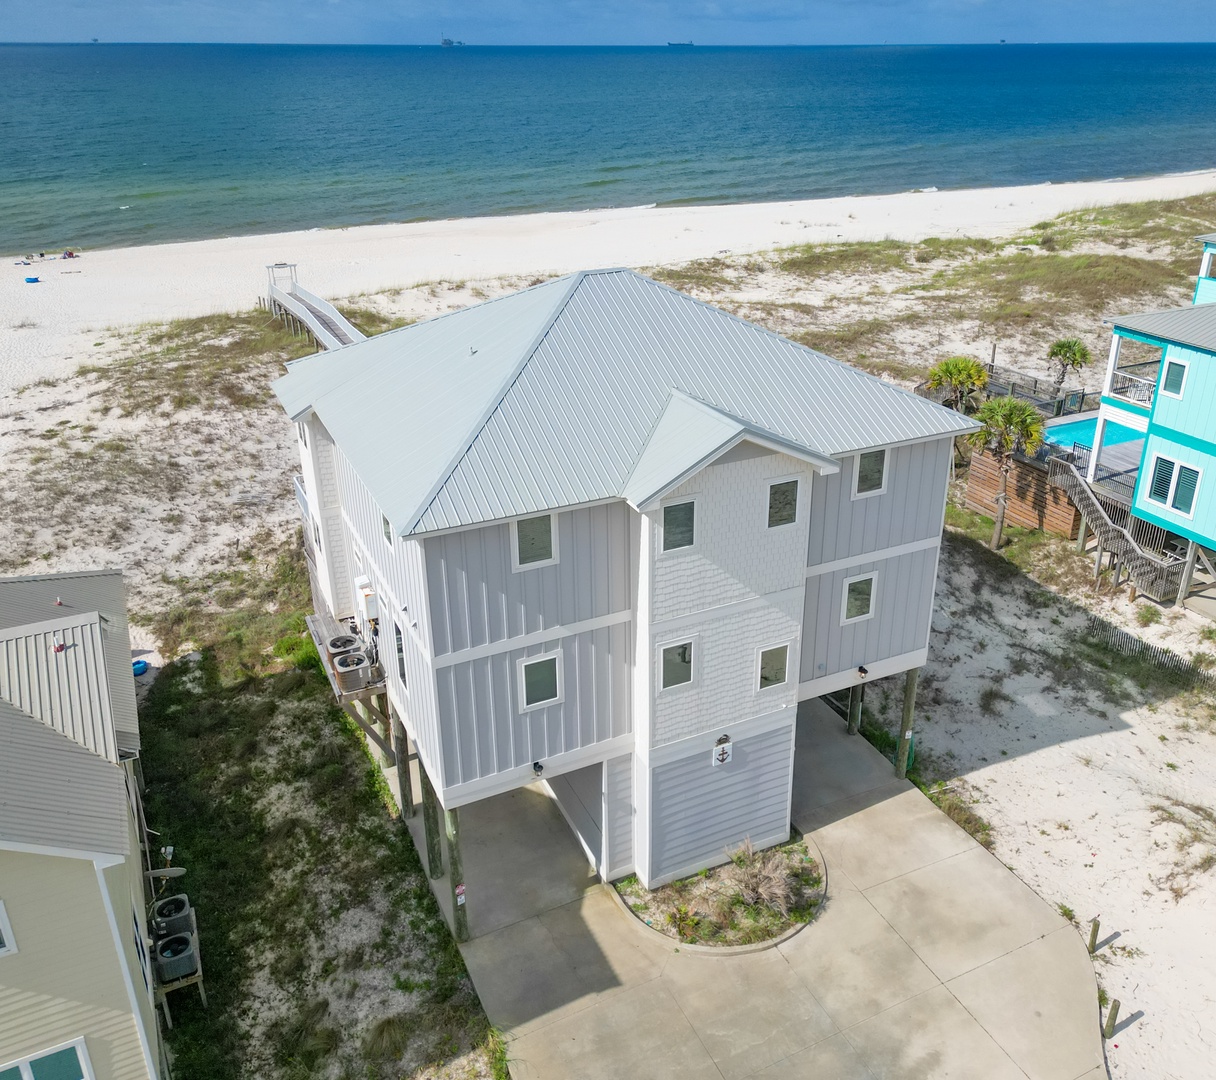 This vacation home has 8 bedrooms/7.5 baths and is pet-friendly!